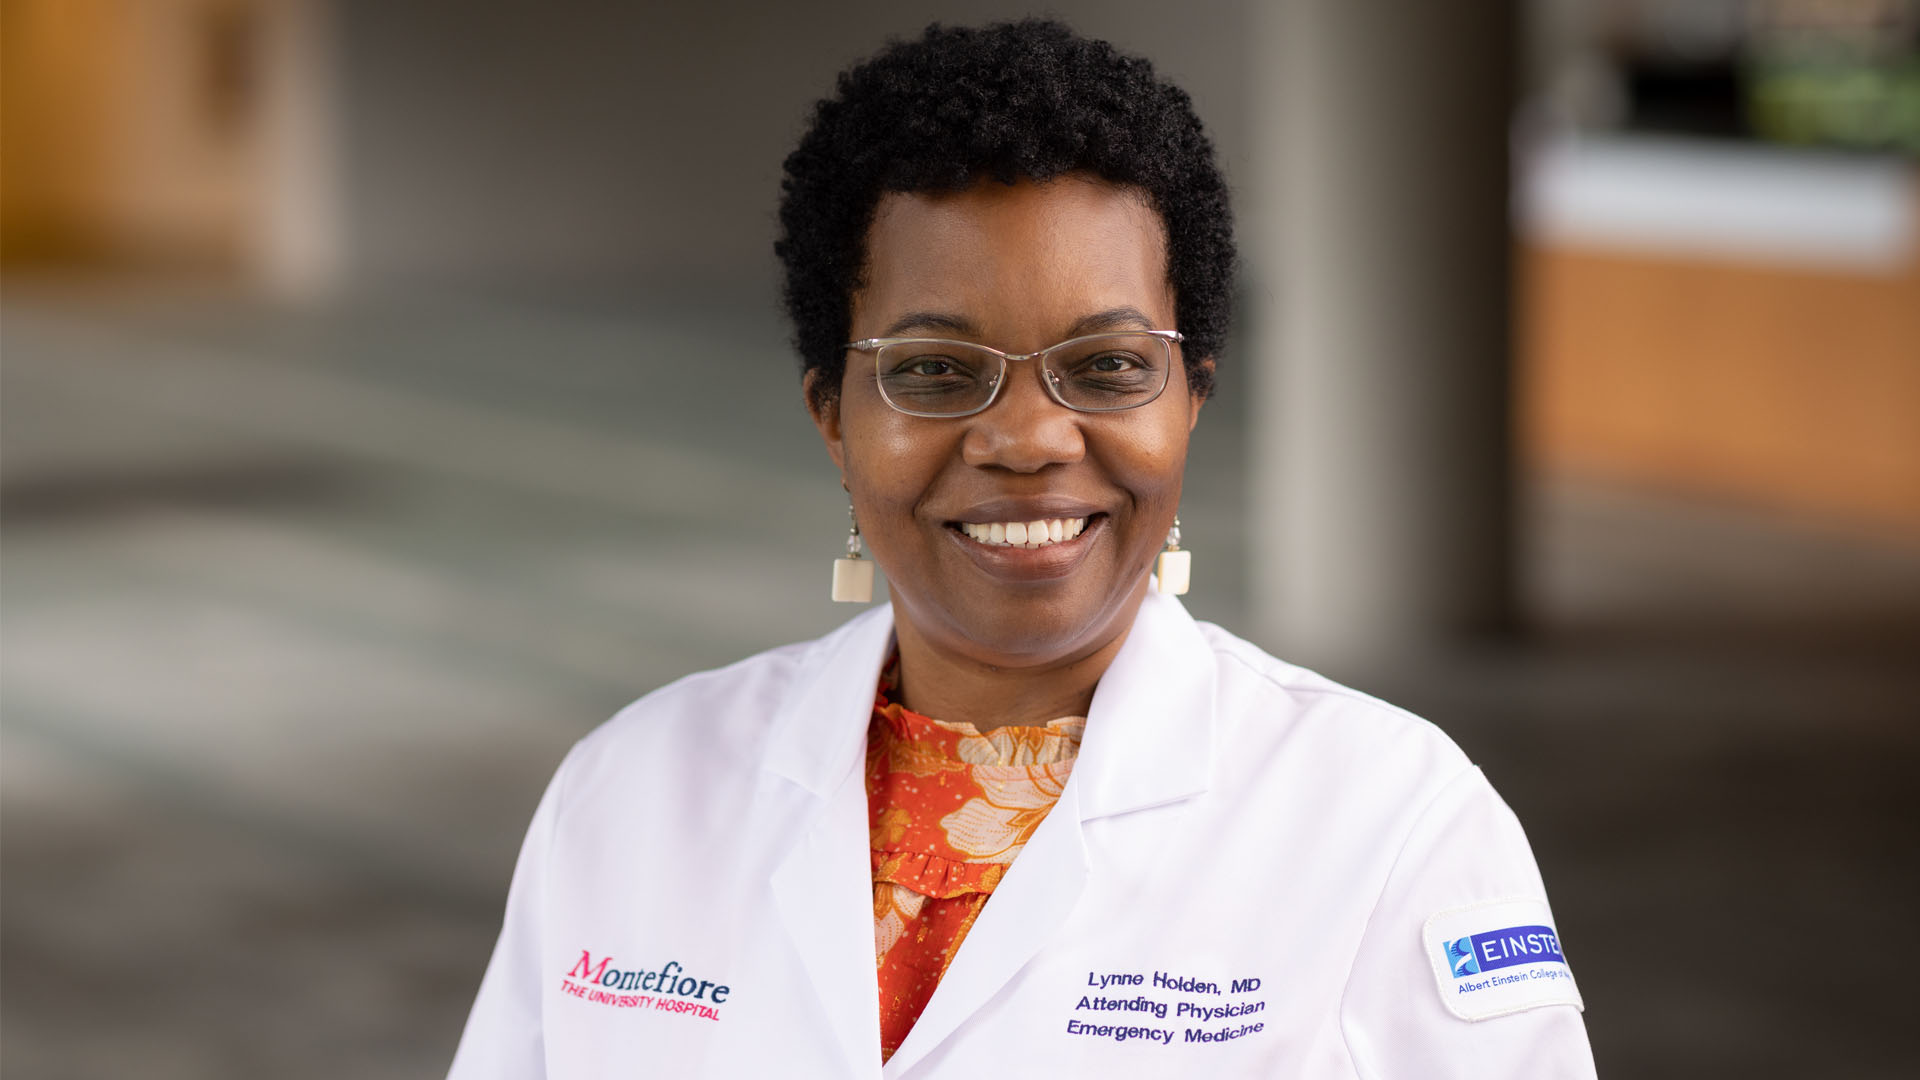 Lynne Holden, M.D., Named Senior Associate Dean for Diversity and Inclusion at Albert Einstein College of Medicine